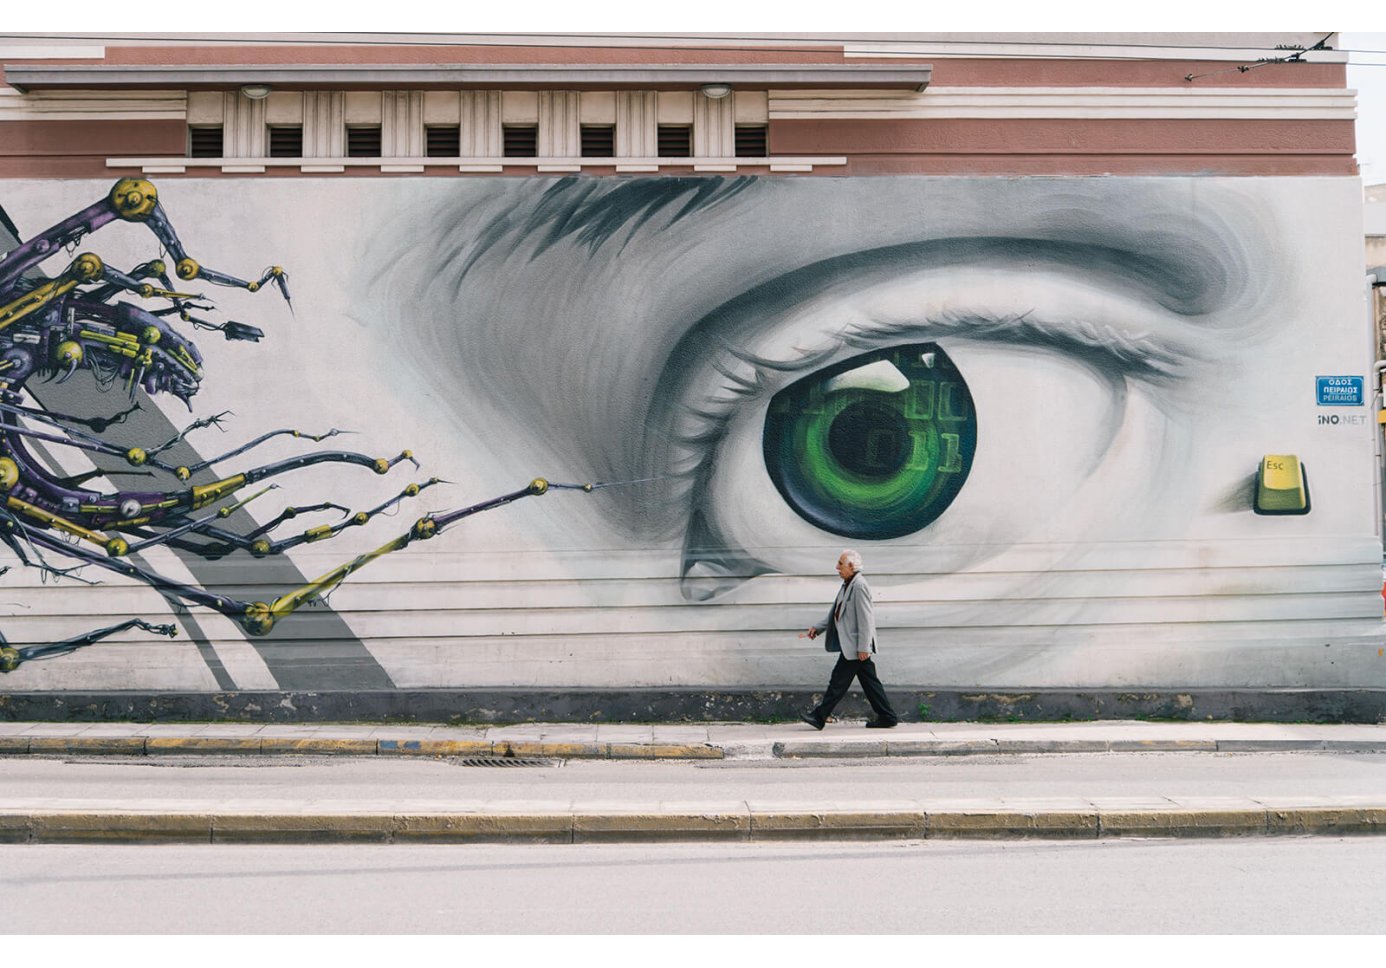 graffiti of a green eye on a wall and a person walking by.